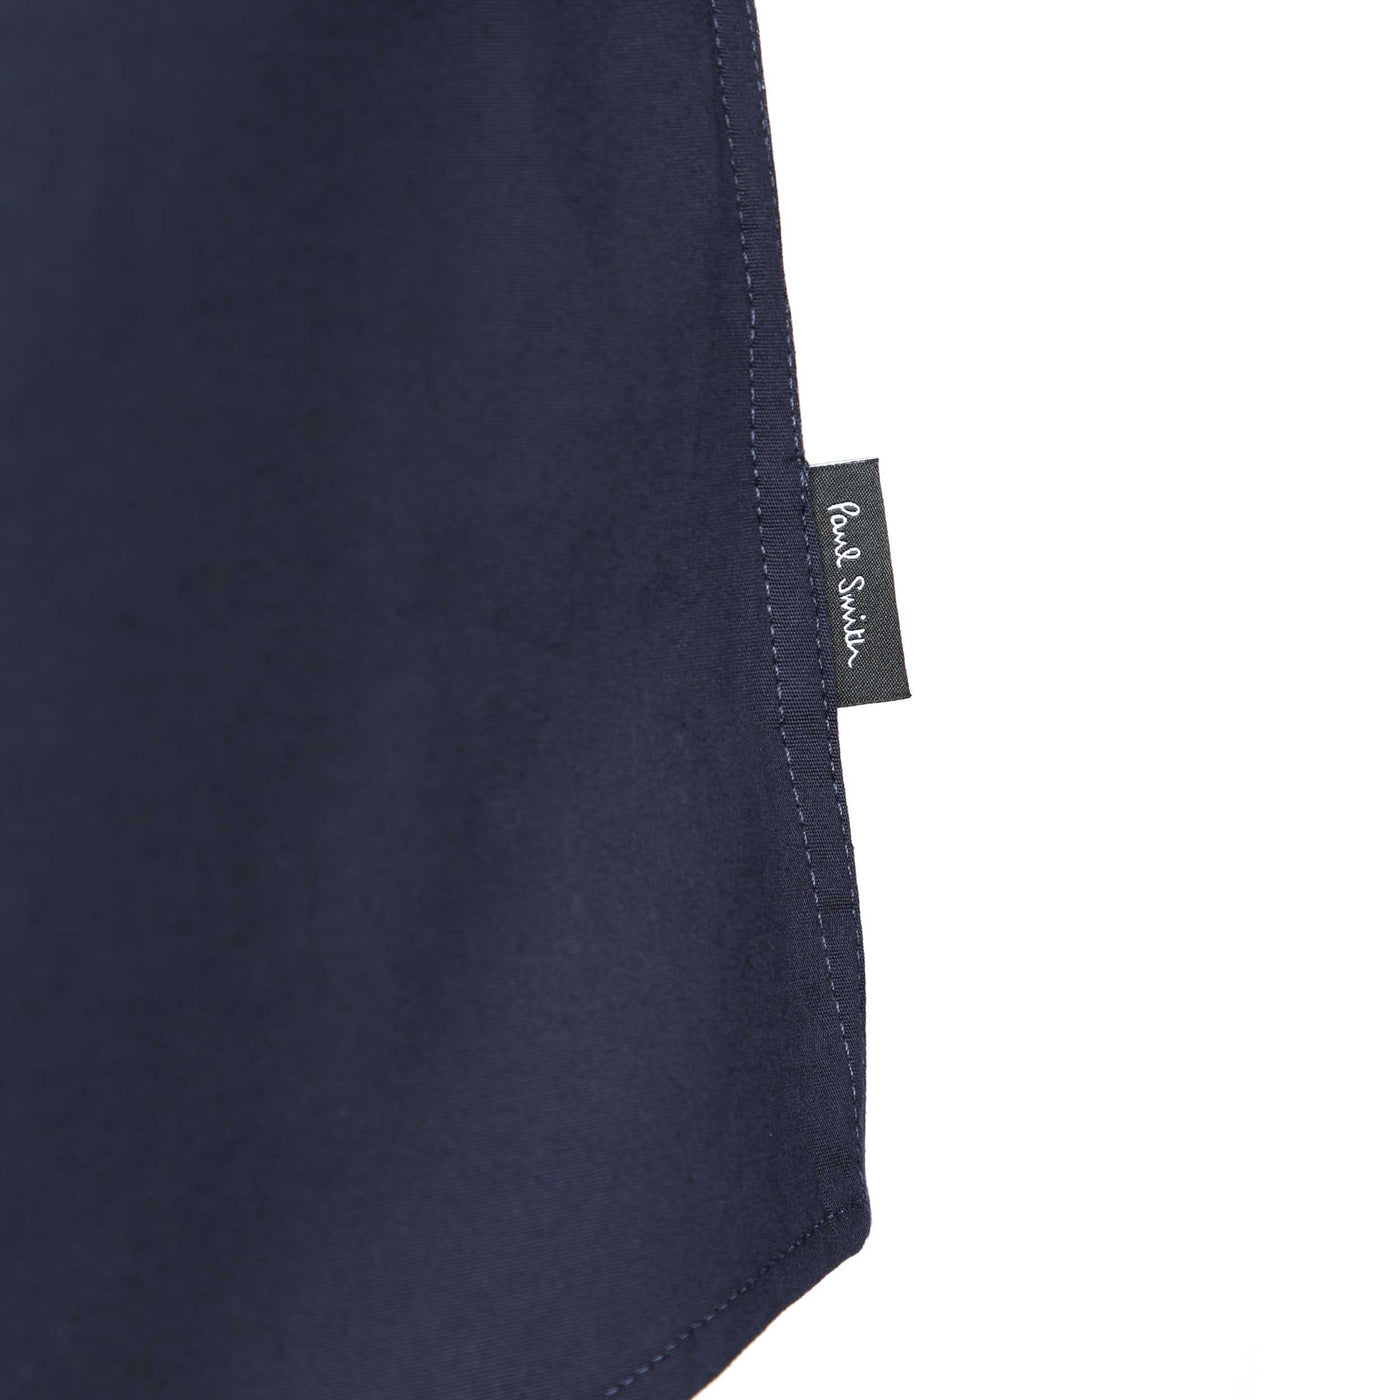 Paul Smith Tailored Fit Shirt in Navy Logo Tab